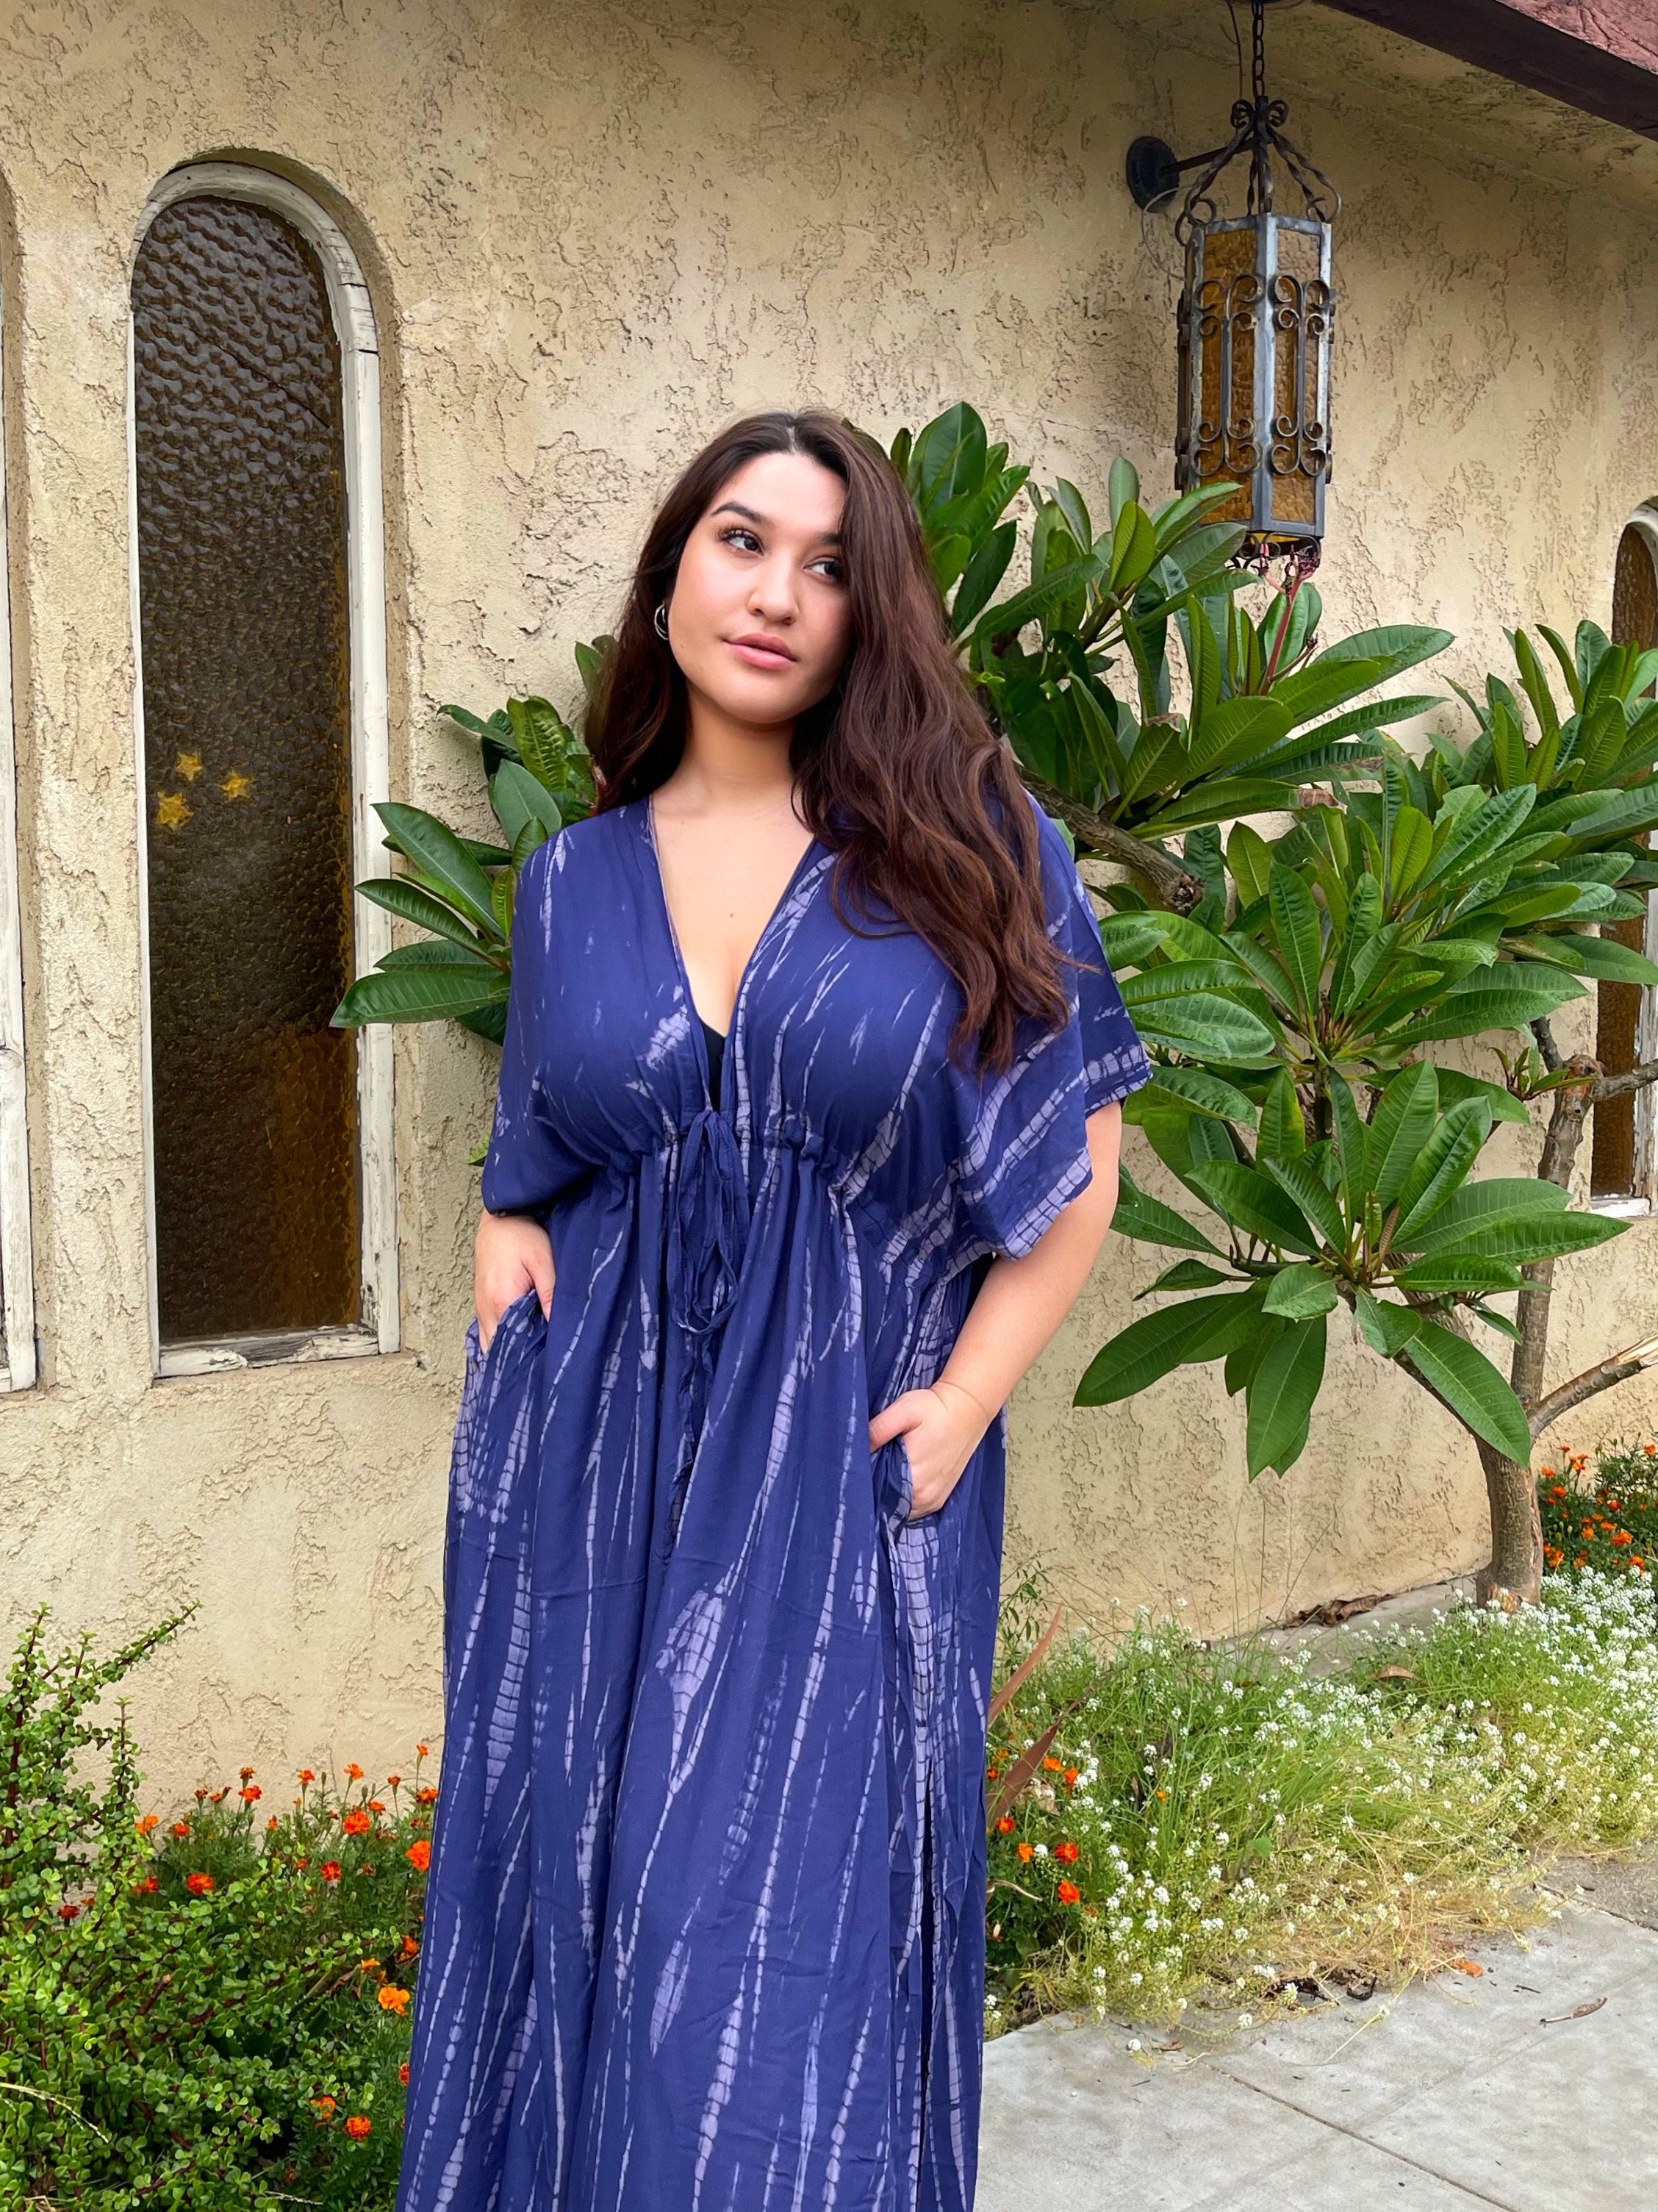 Shop Oversized Kaftan, Experience vacation vibes with the Goddess - Tie Dye Kaftan Maxi Dress, This irresistibly alluring maxi dress will transport you to the beach, with thoughts of wind in your hair, the soothing ocean waves, and sand underfoot. Perfect for resort dress, beach coverup and gift for her.